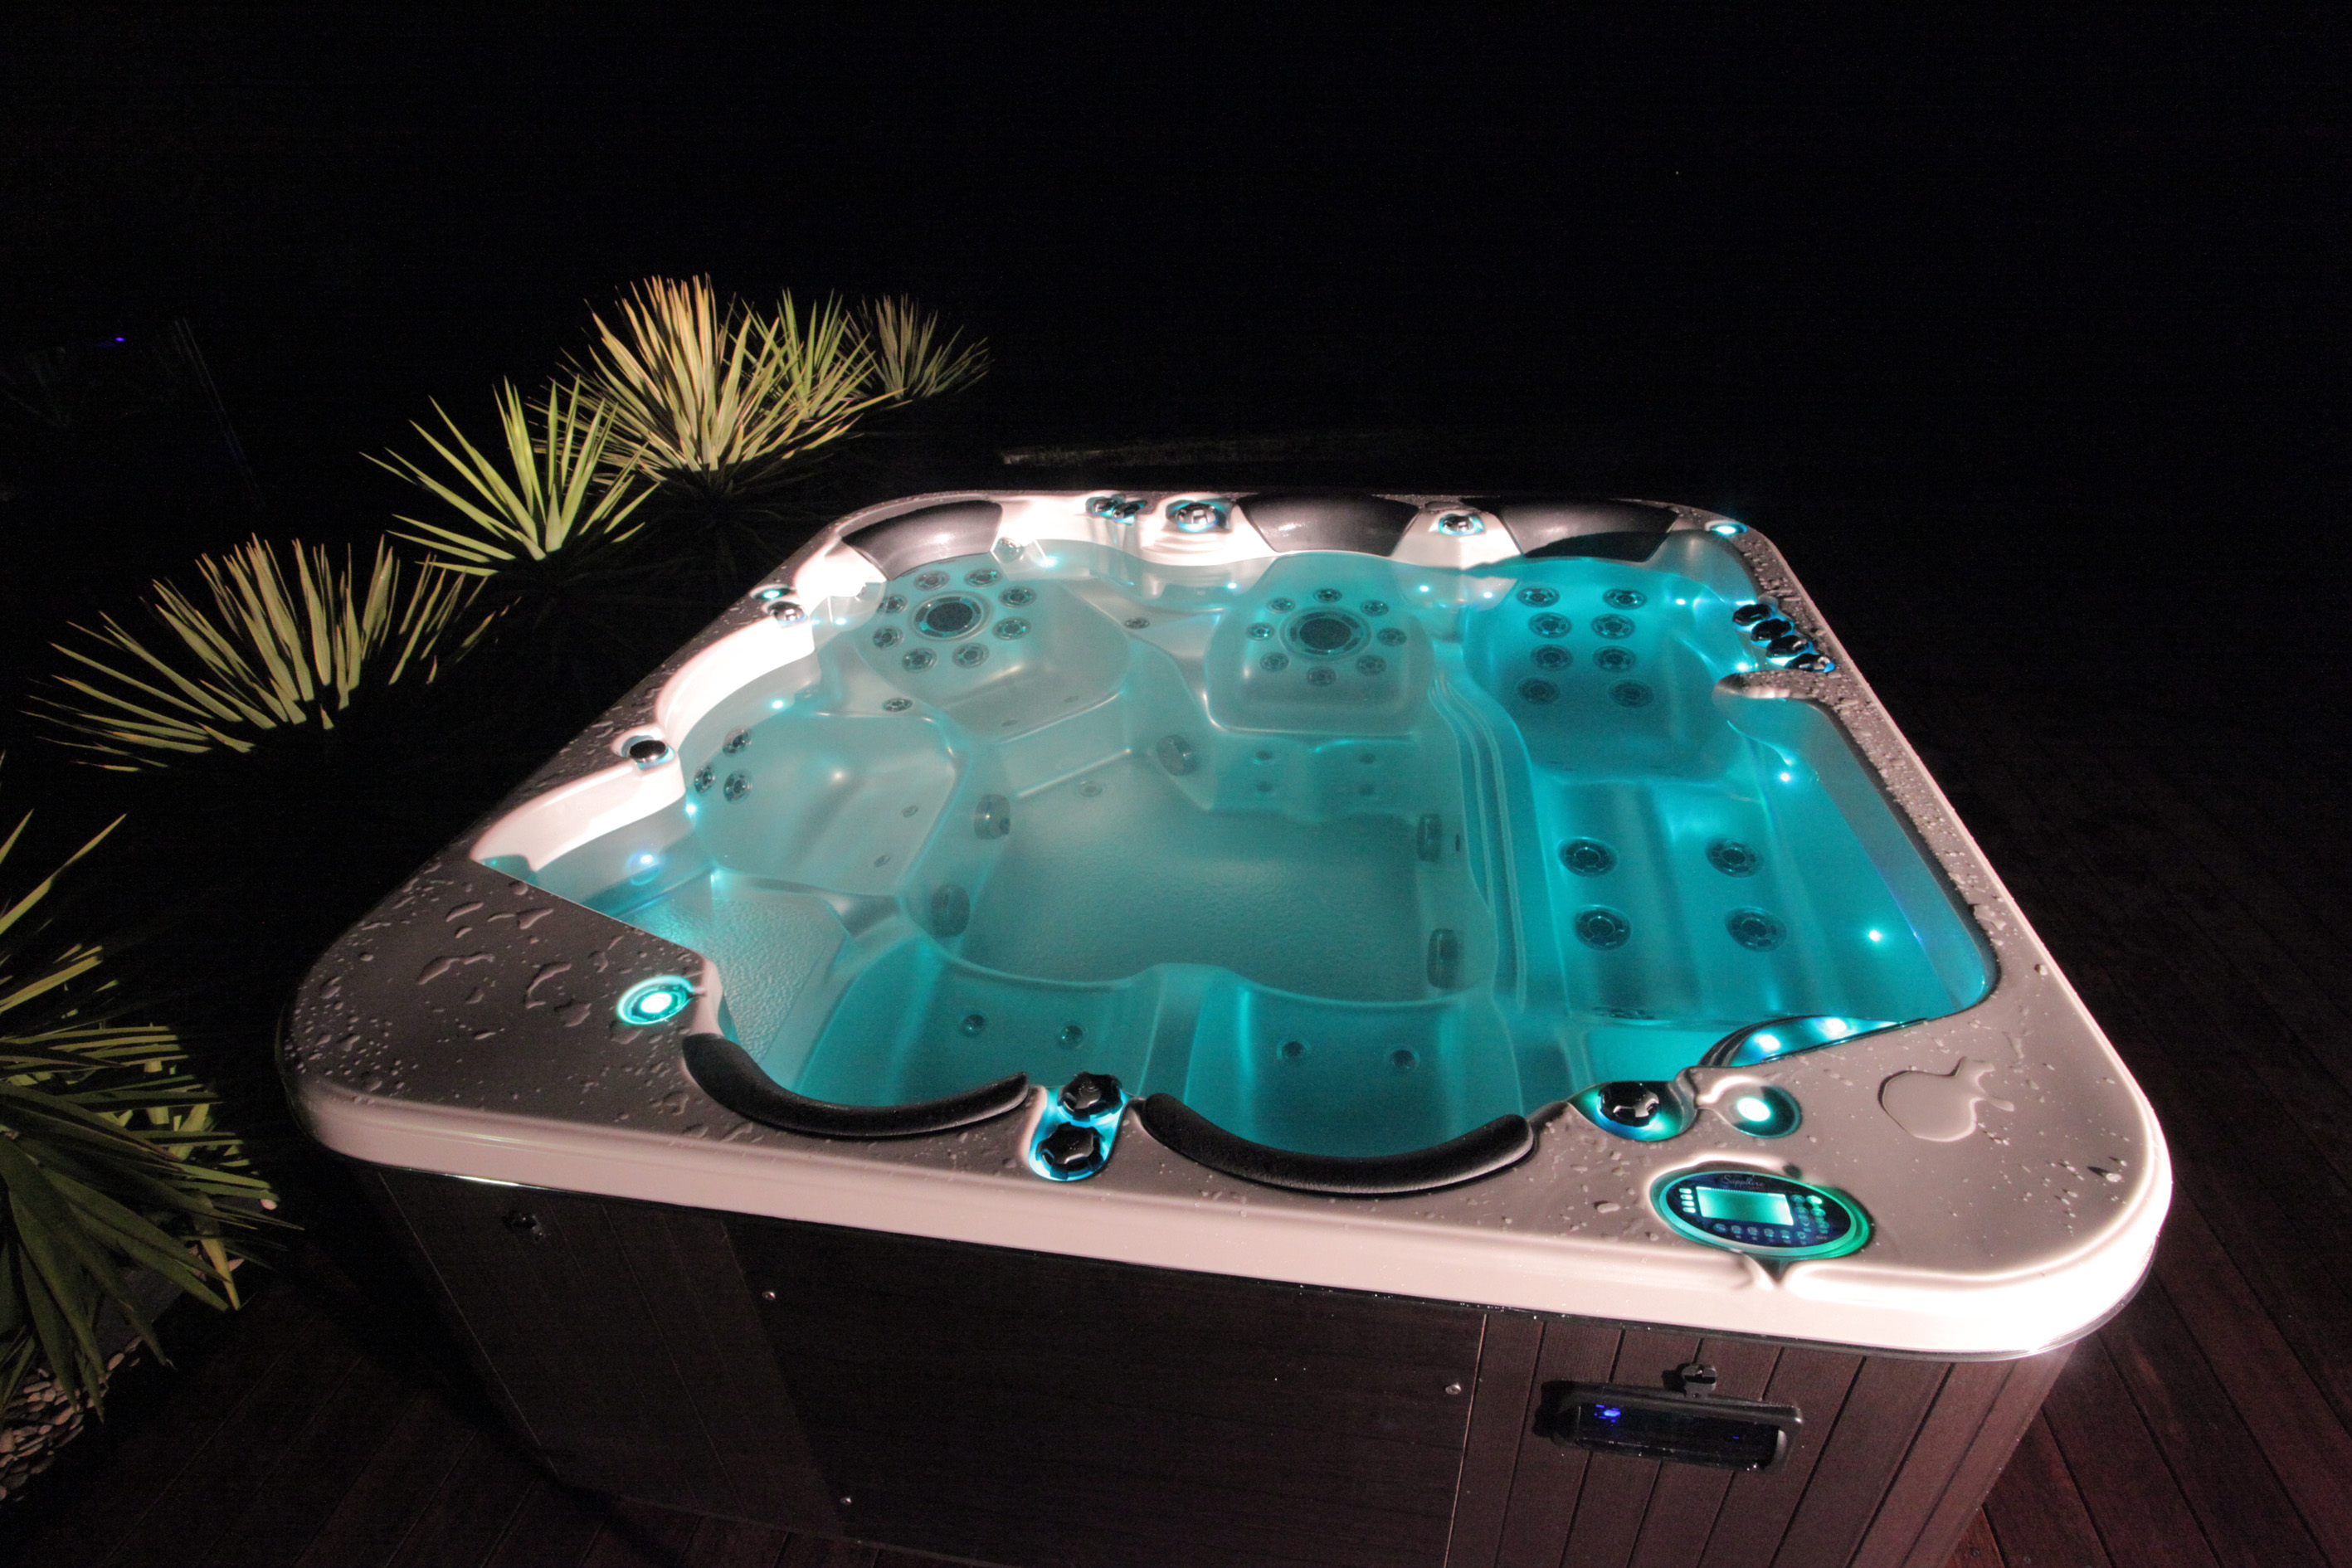 10 Tips For Using Your Hot Tub In Winter - Hot Tubs Minneapolis, Des  Moines, Swim Spas, Saunas Sale